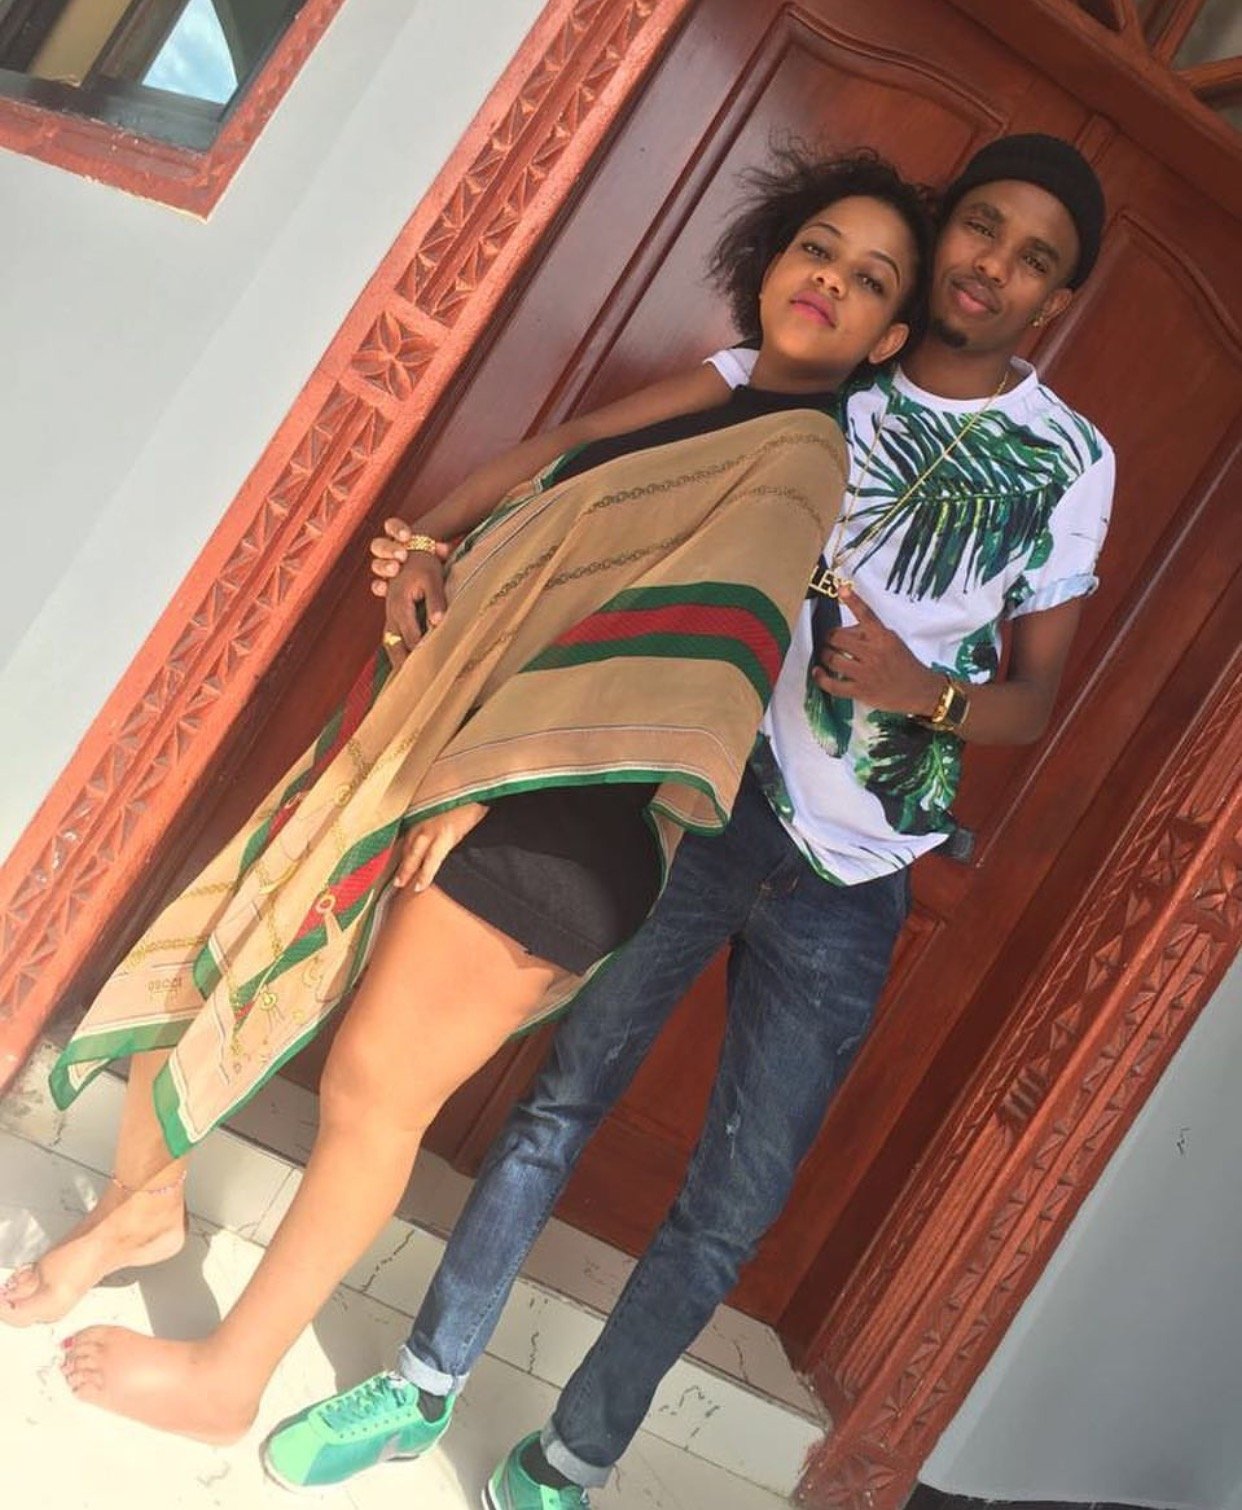 Rayvanny’s girlfriend steps out in a tiny short as she flaunts her bulging baby bump